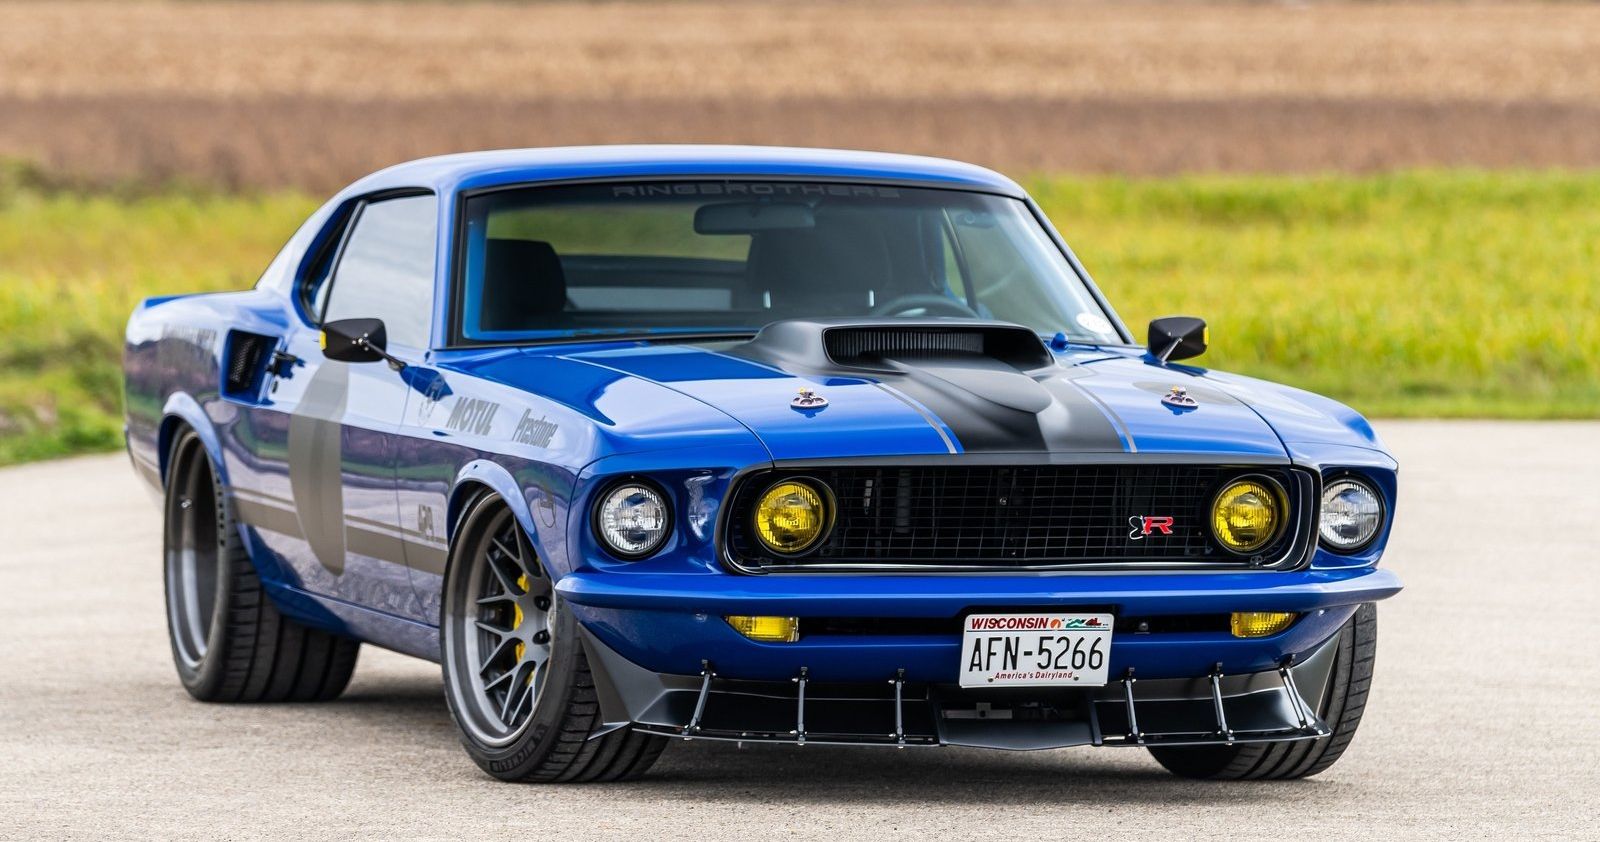 Ringbrothers Reveals 1969 Ford Mustang Mach 1 Build At 2022 Sema Show ...